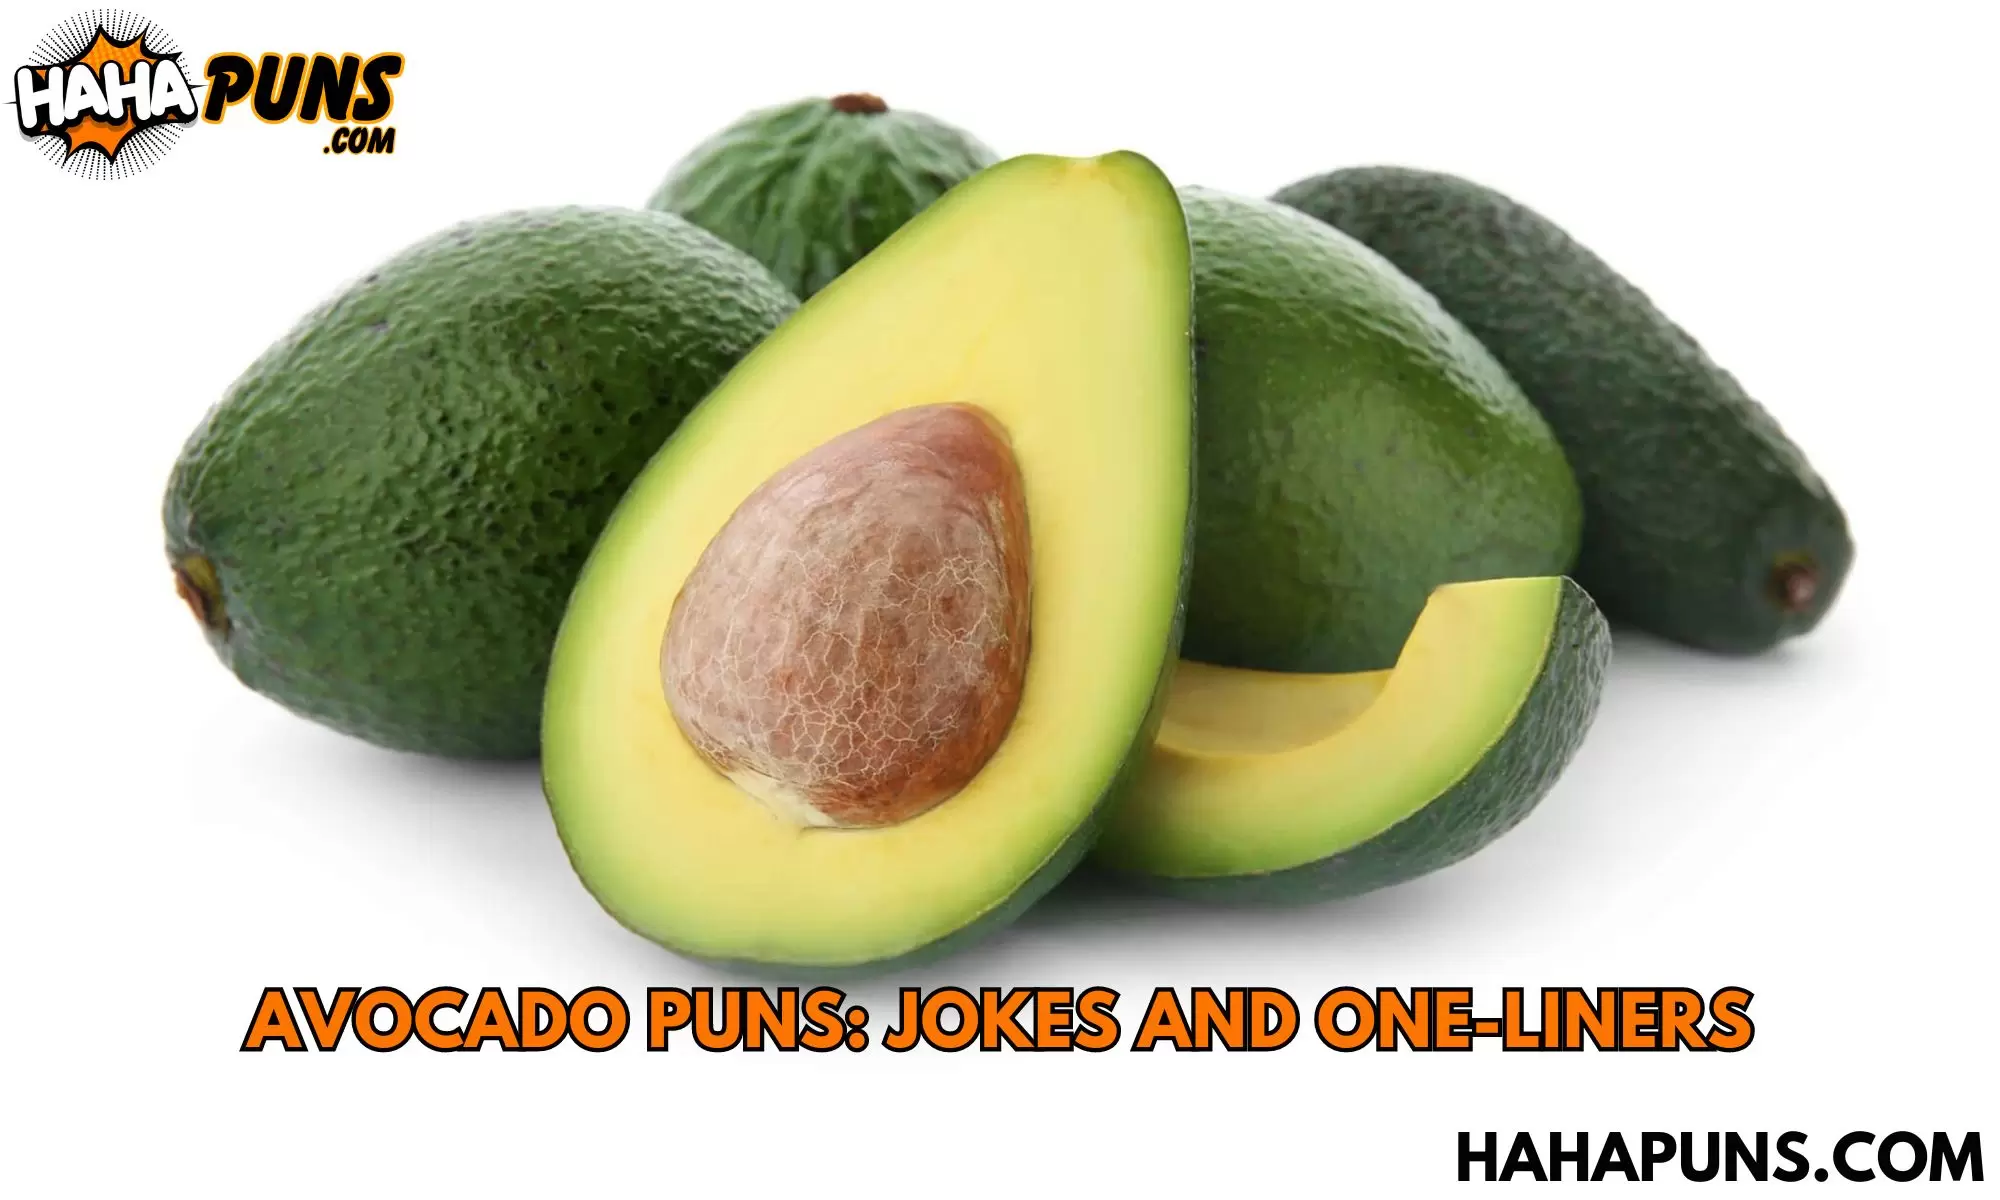 Avocado Puns: Jokes And One-Liners